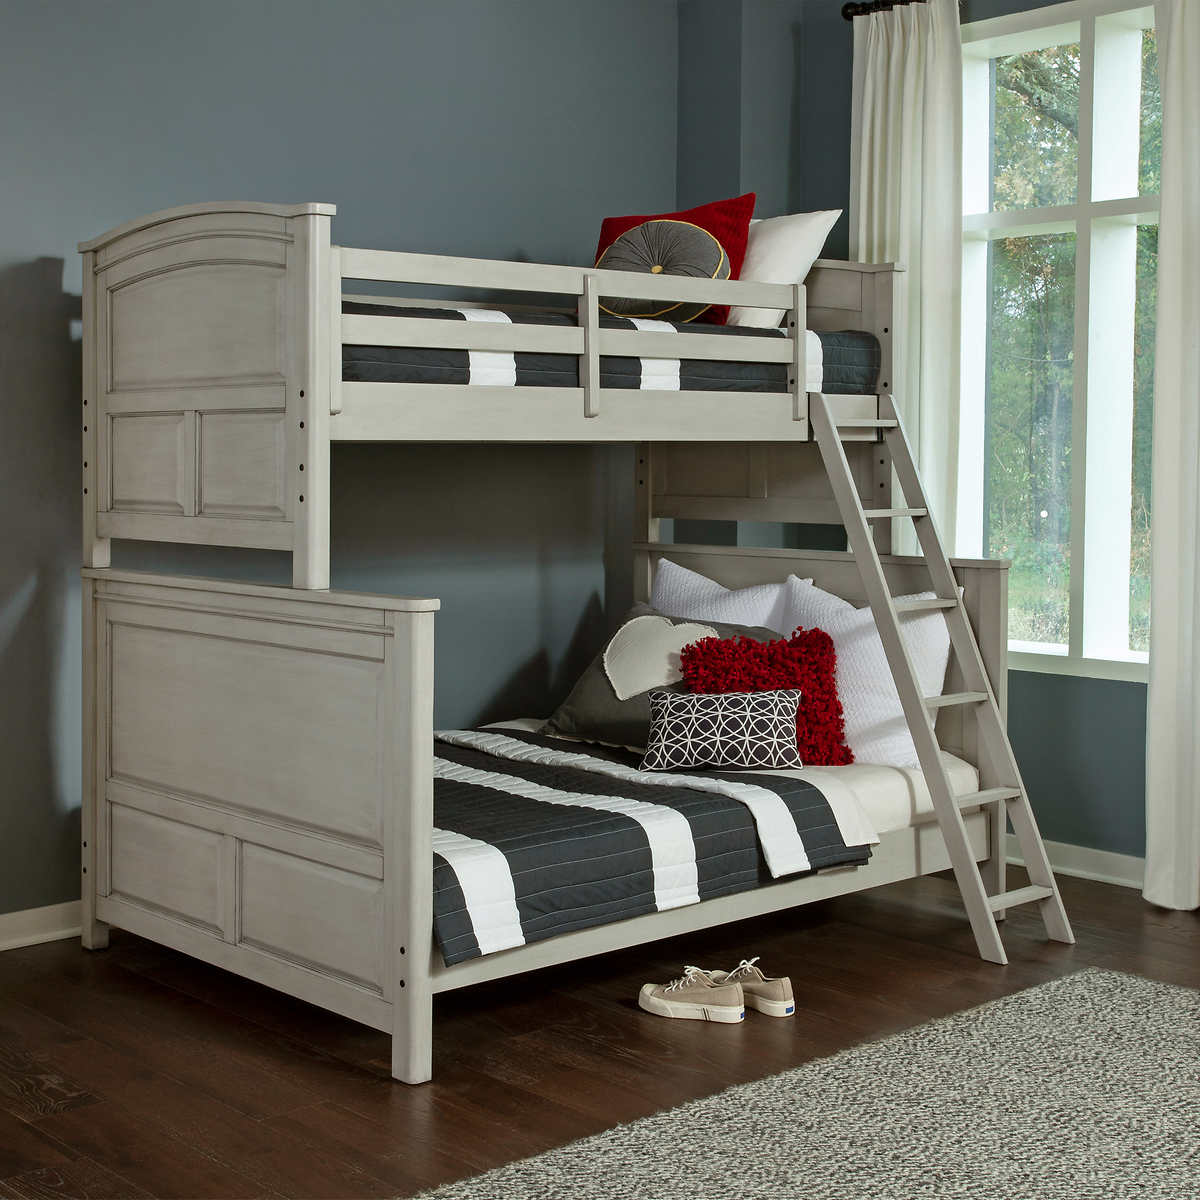 Wingate Twin Over Double Bunk Costco, Twin Beds That Can Convert To Bunk Beds